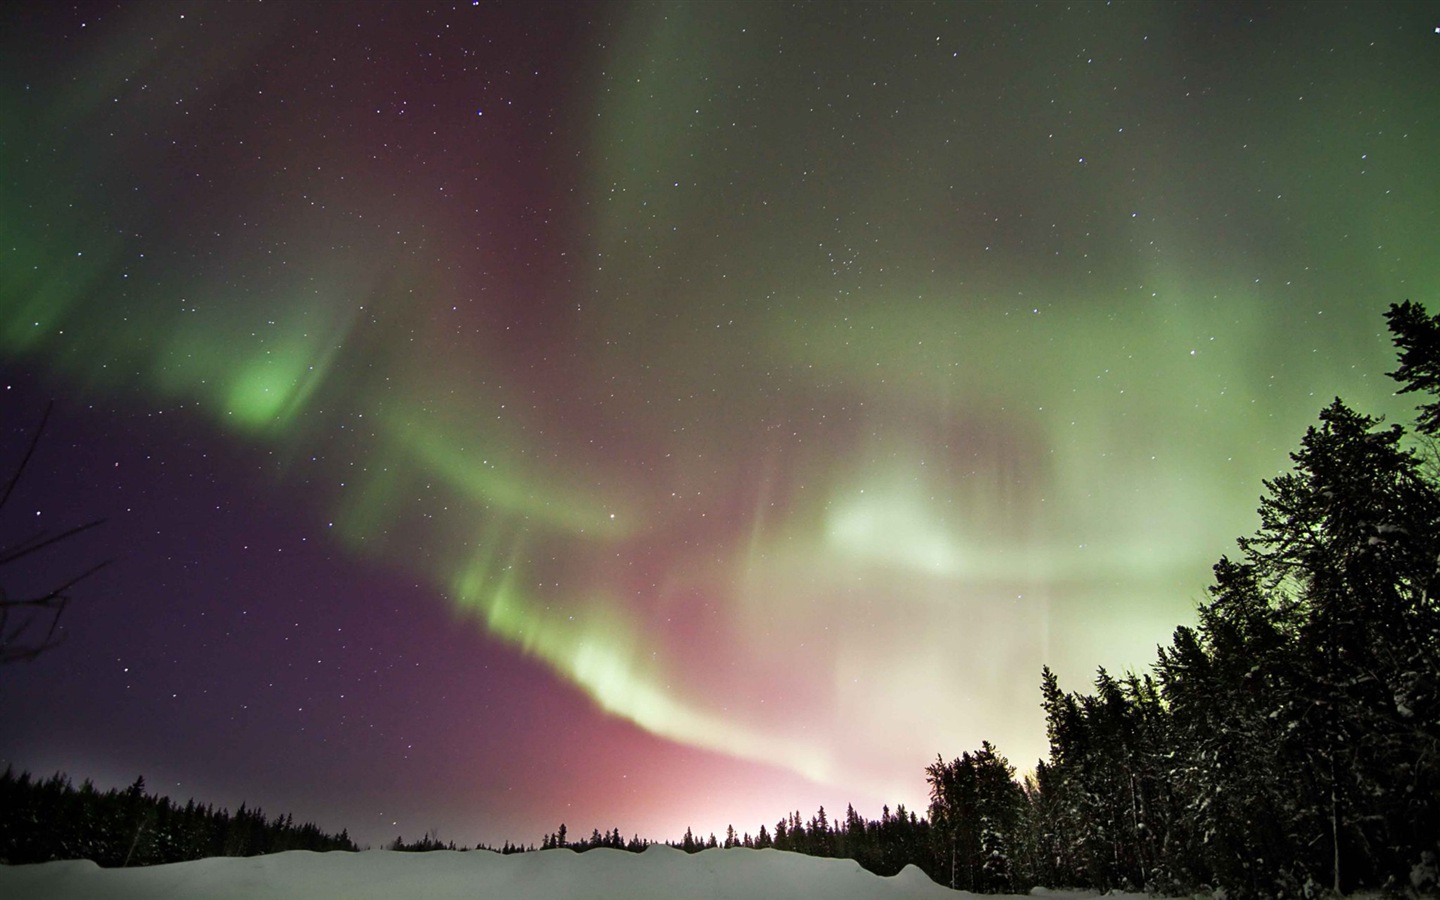 Natural wonders of the Northern Lights HD Wallpaper (1) #18 - 1440x900